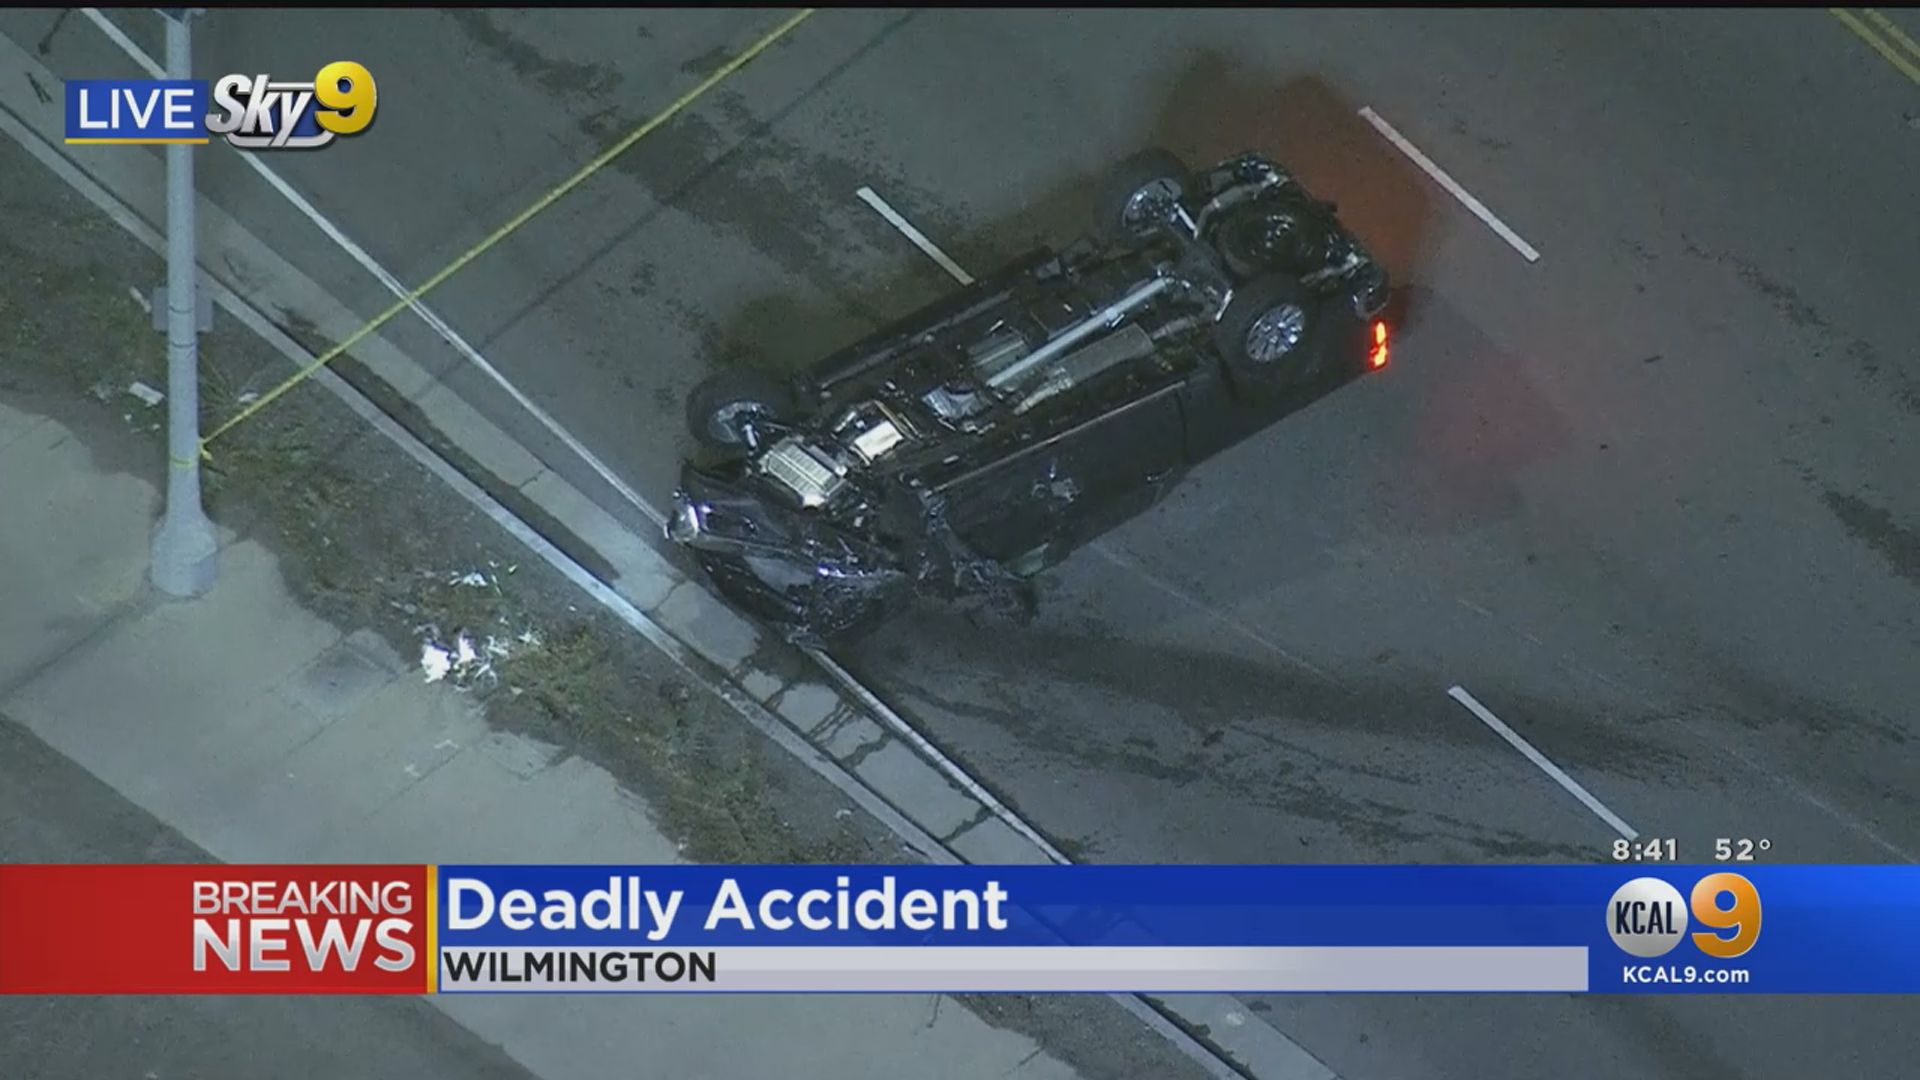 Fatal Car Accident in Wilmington, California near Los Angeles